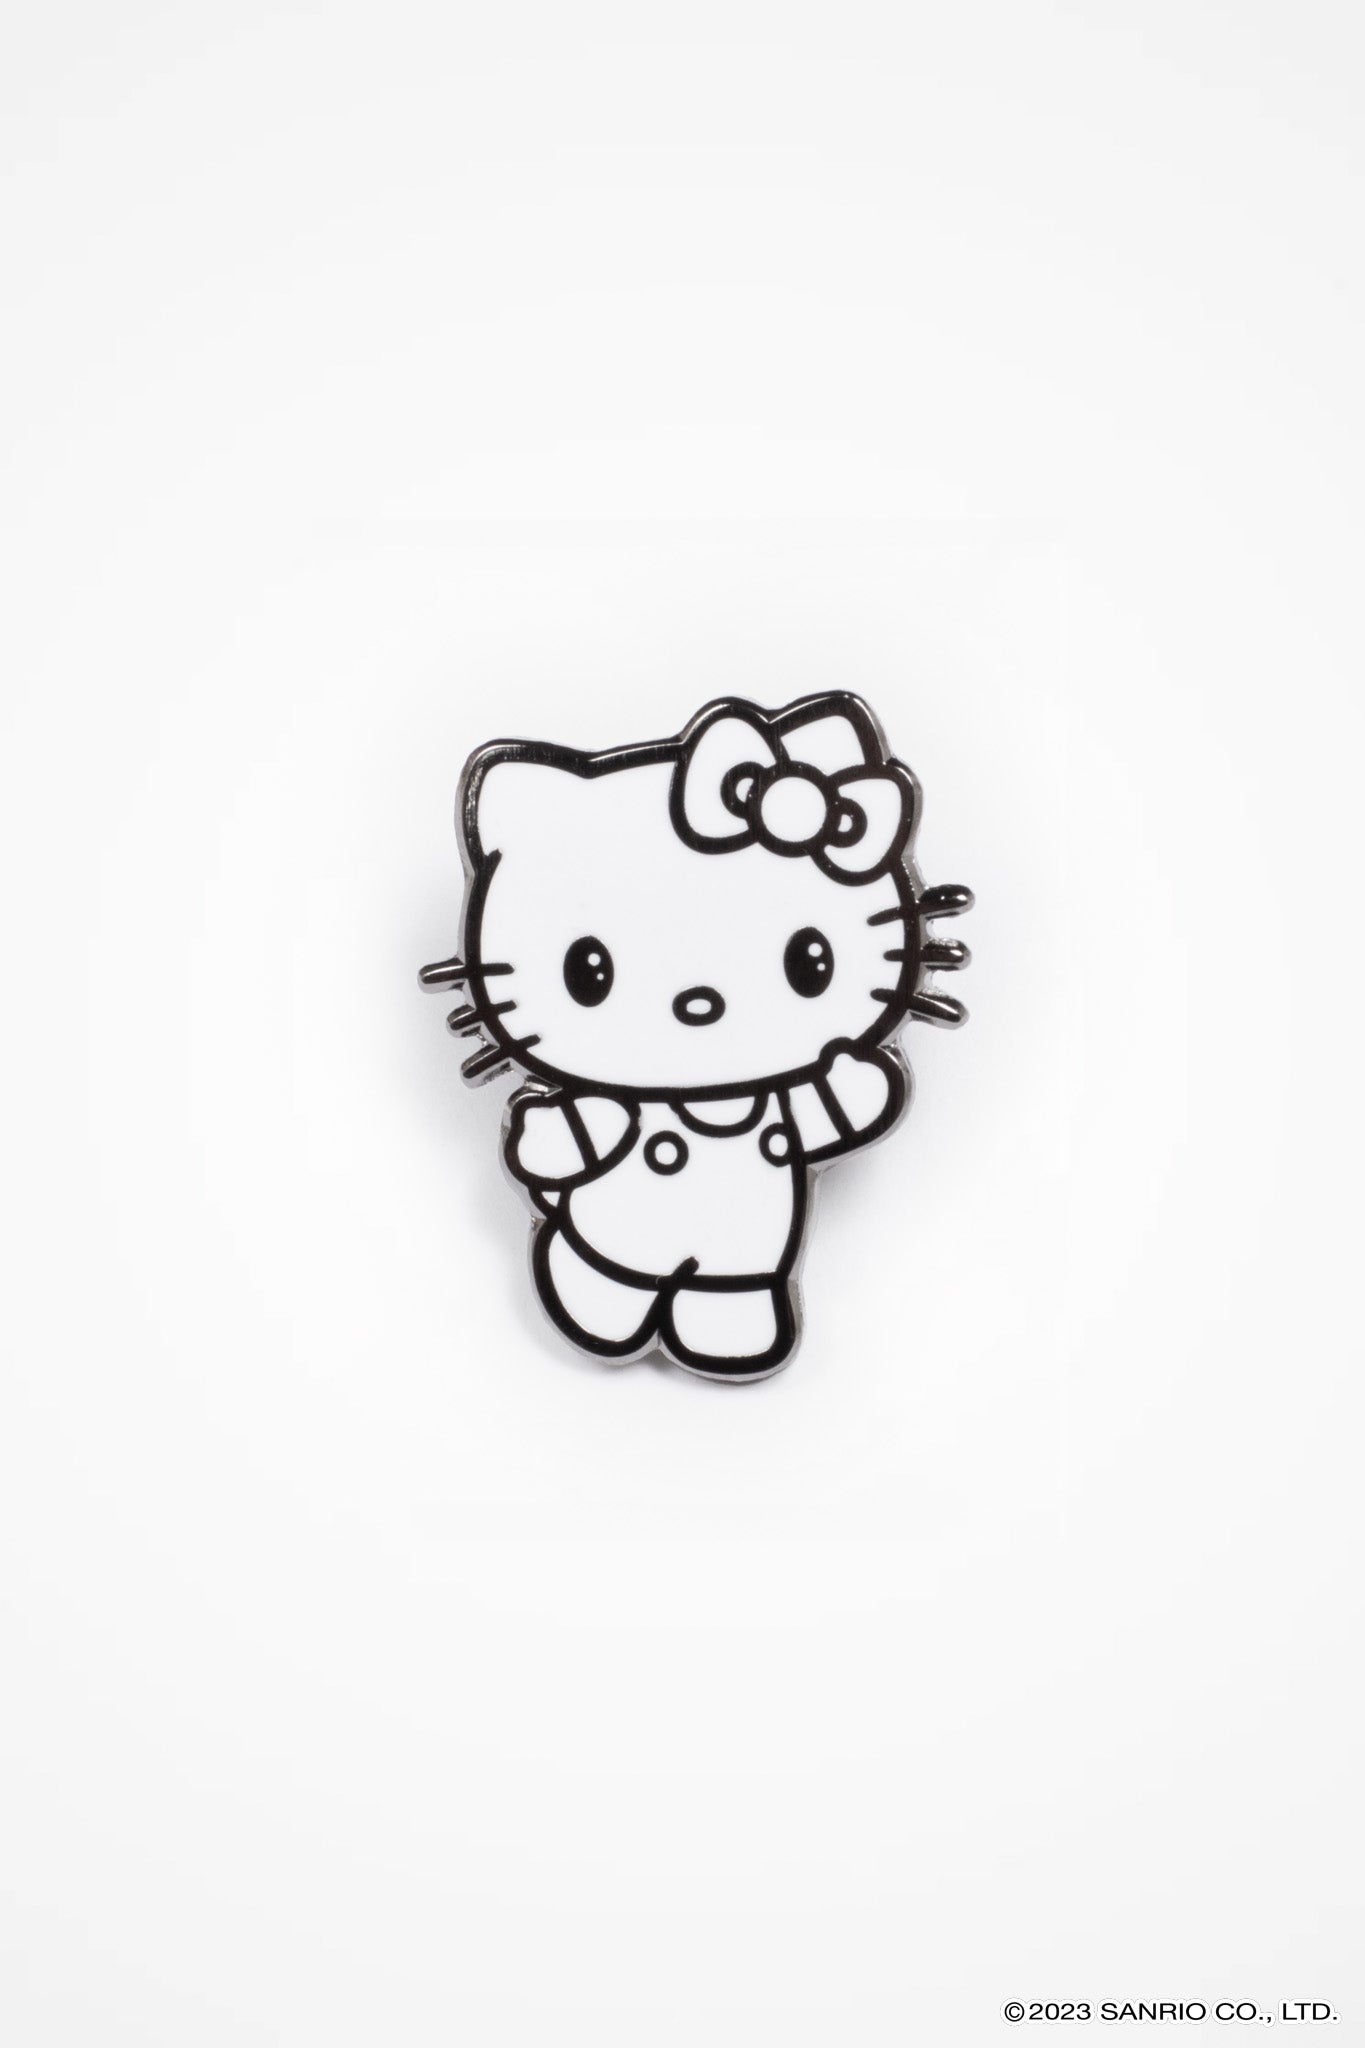 Hello Kitty 6-Piece Enamel Pin Set, Anime Pins for Backpacks, Hats